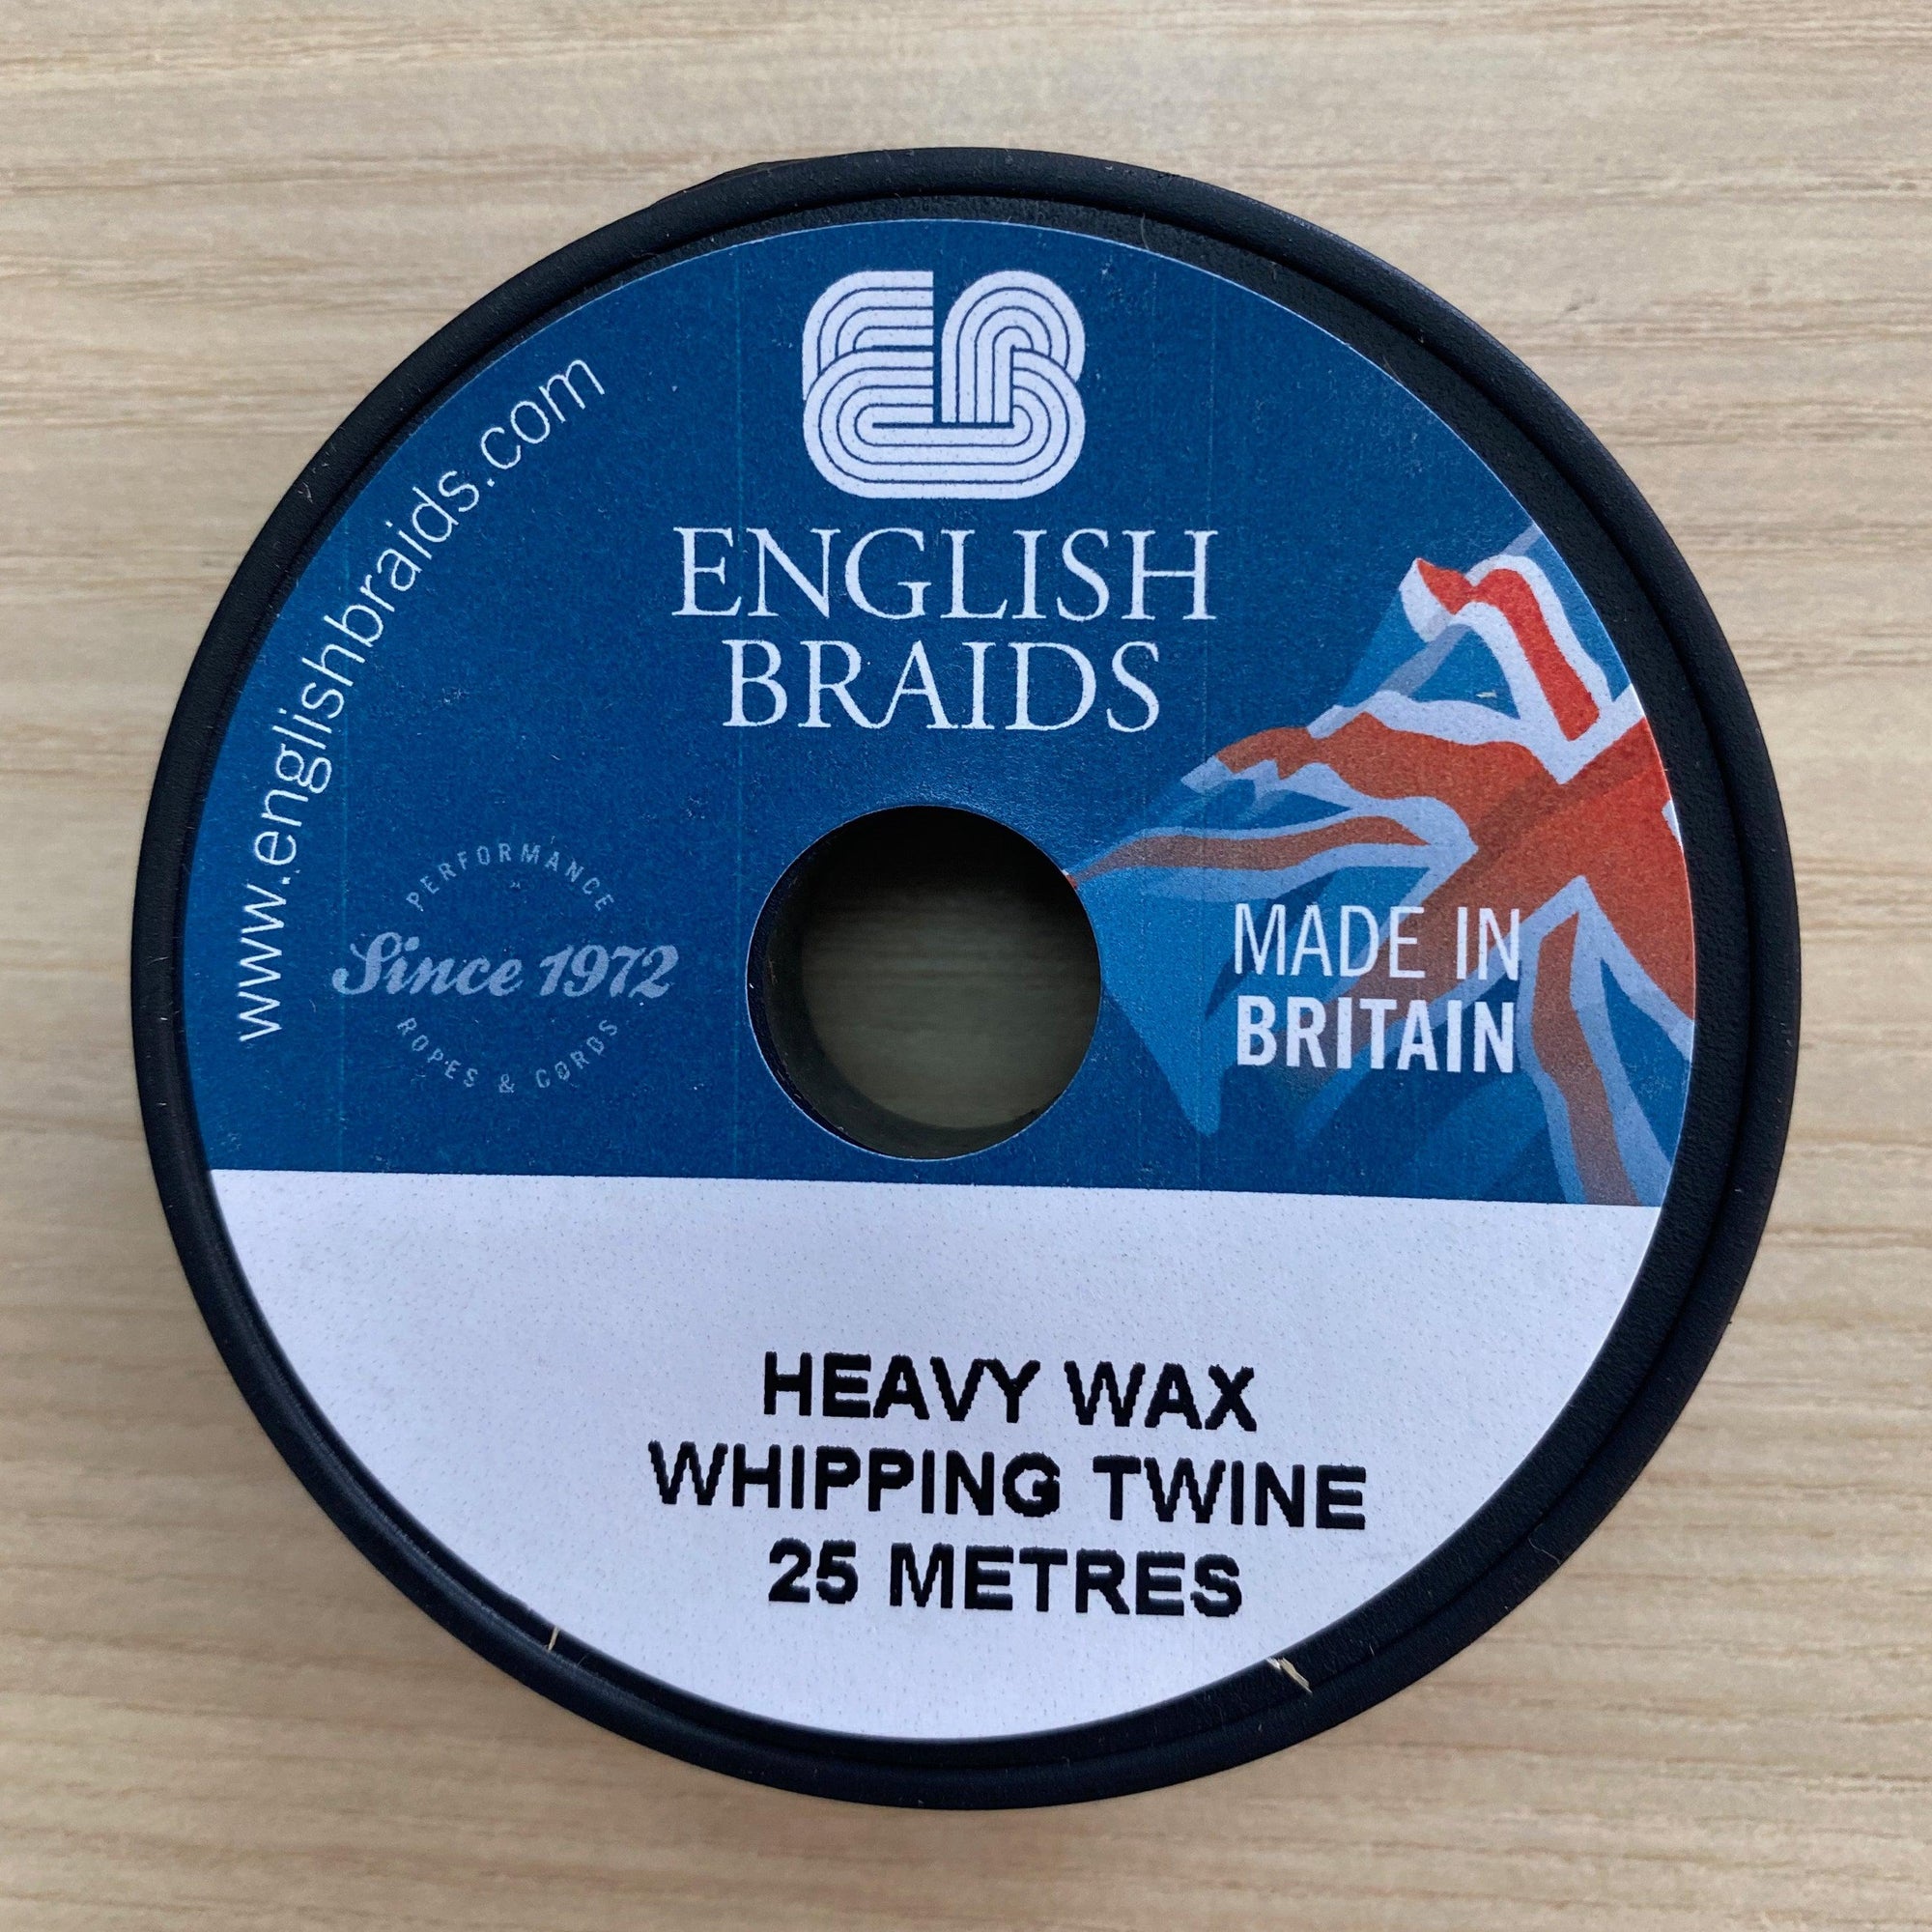 HEAVY WAX WHIPPING TWINE (25M) - Ropes.sg